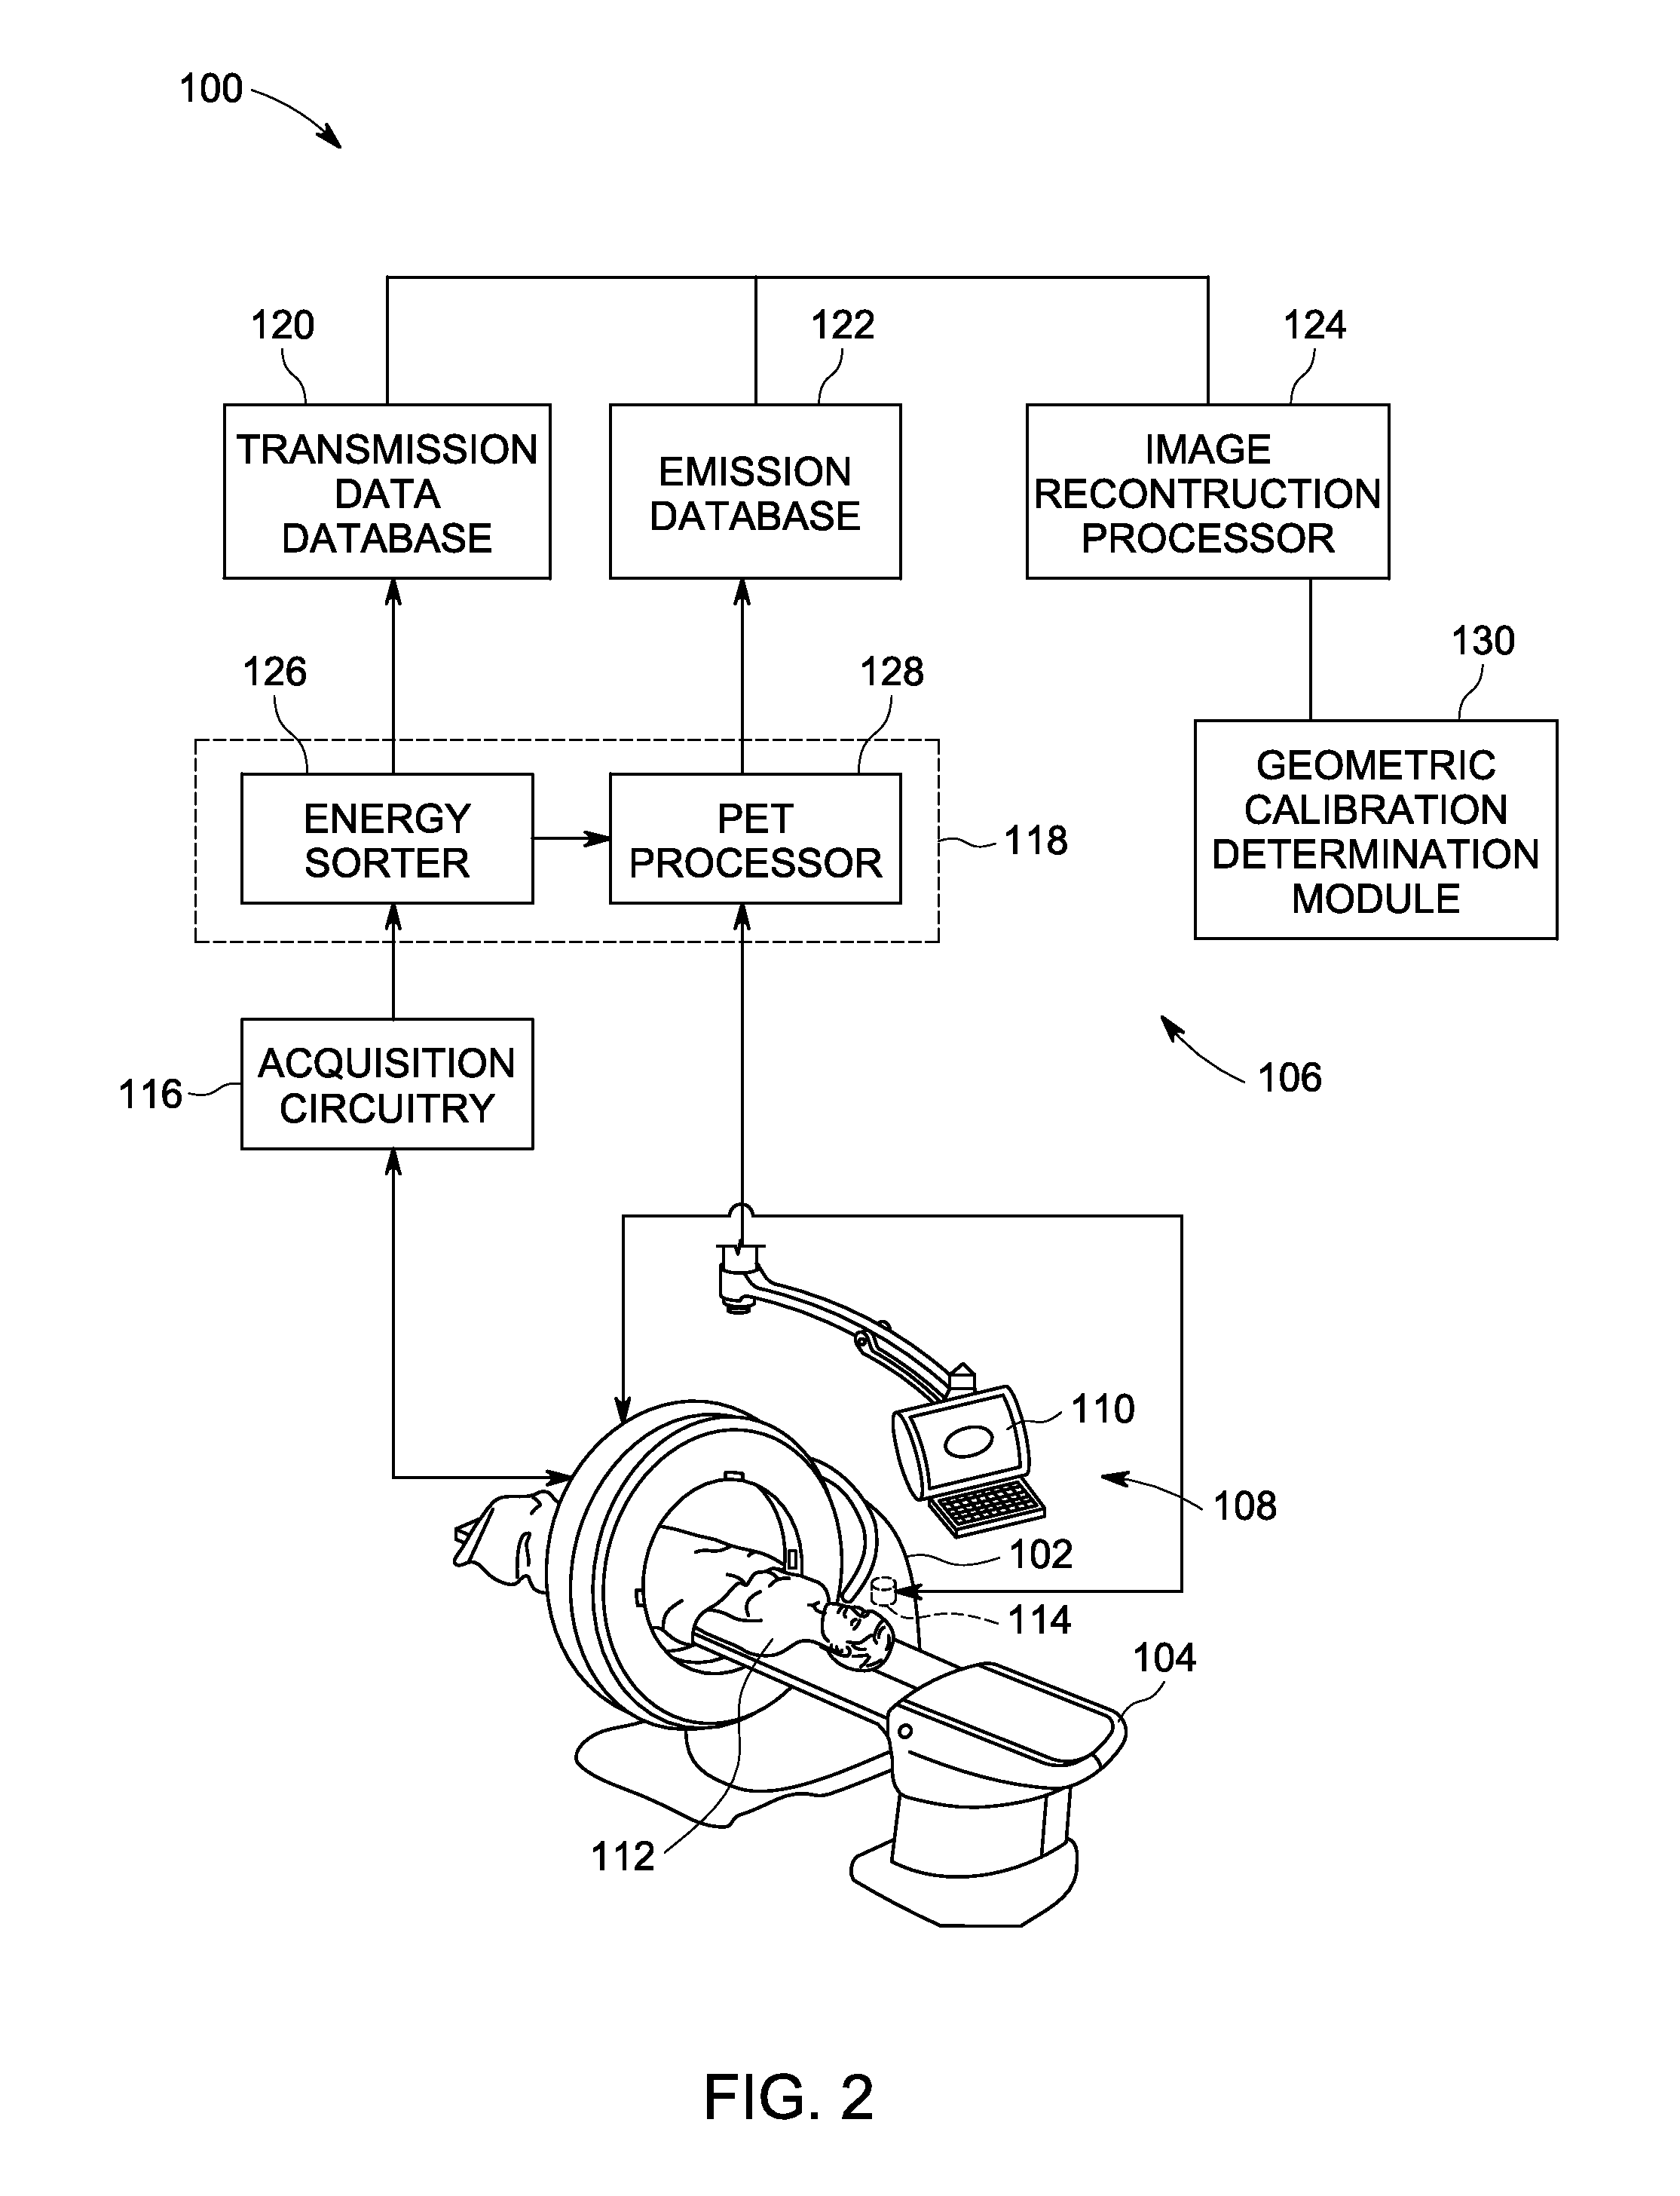 Apparatus and methods for geometric calibration of positron emission tomography systems